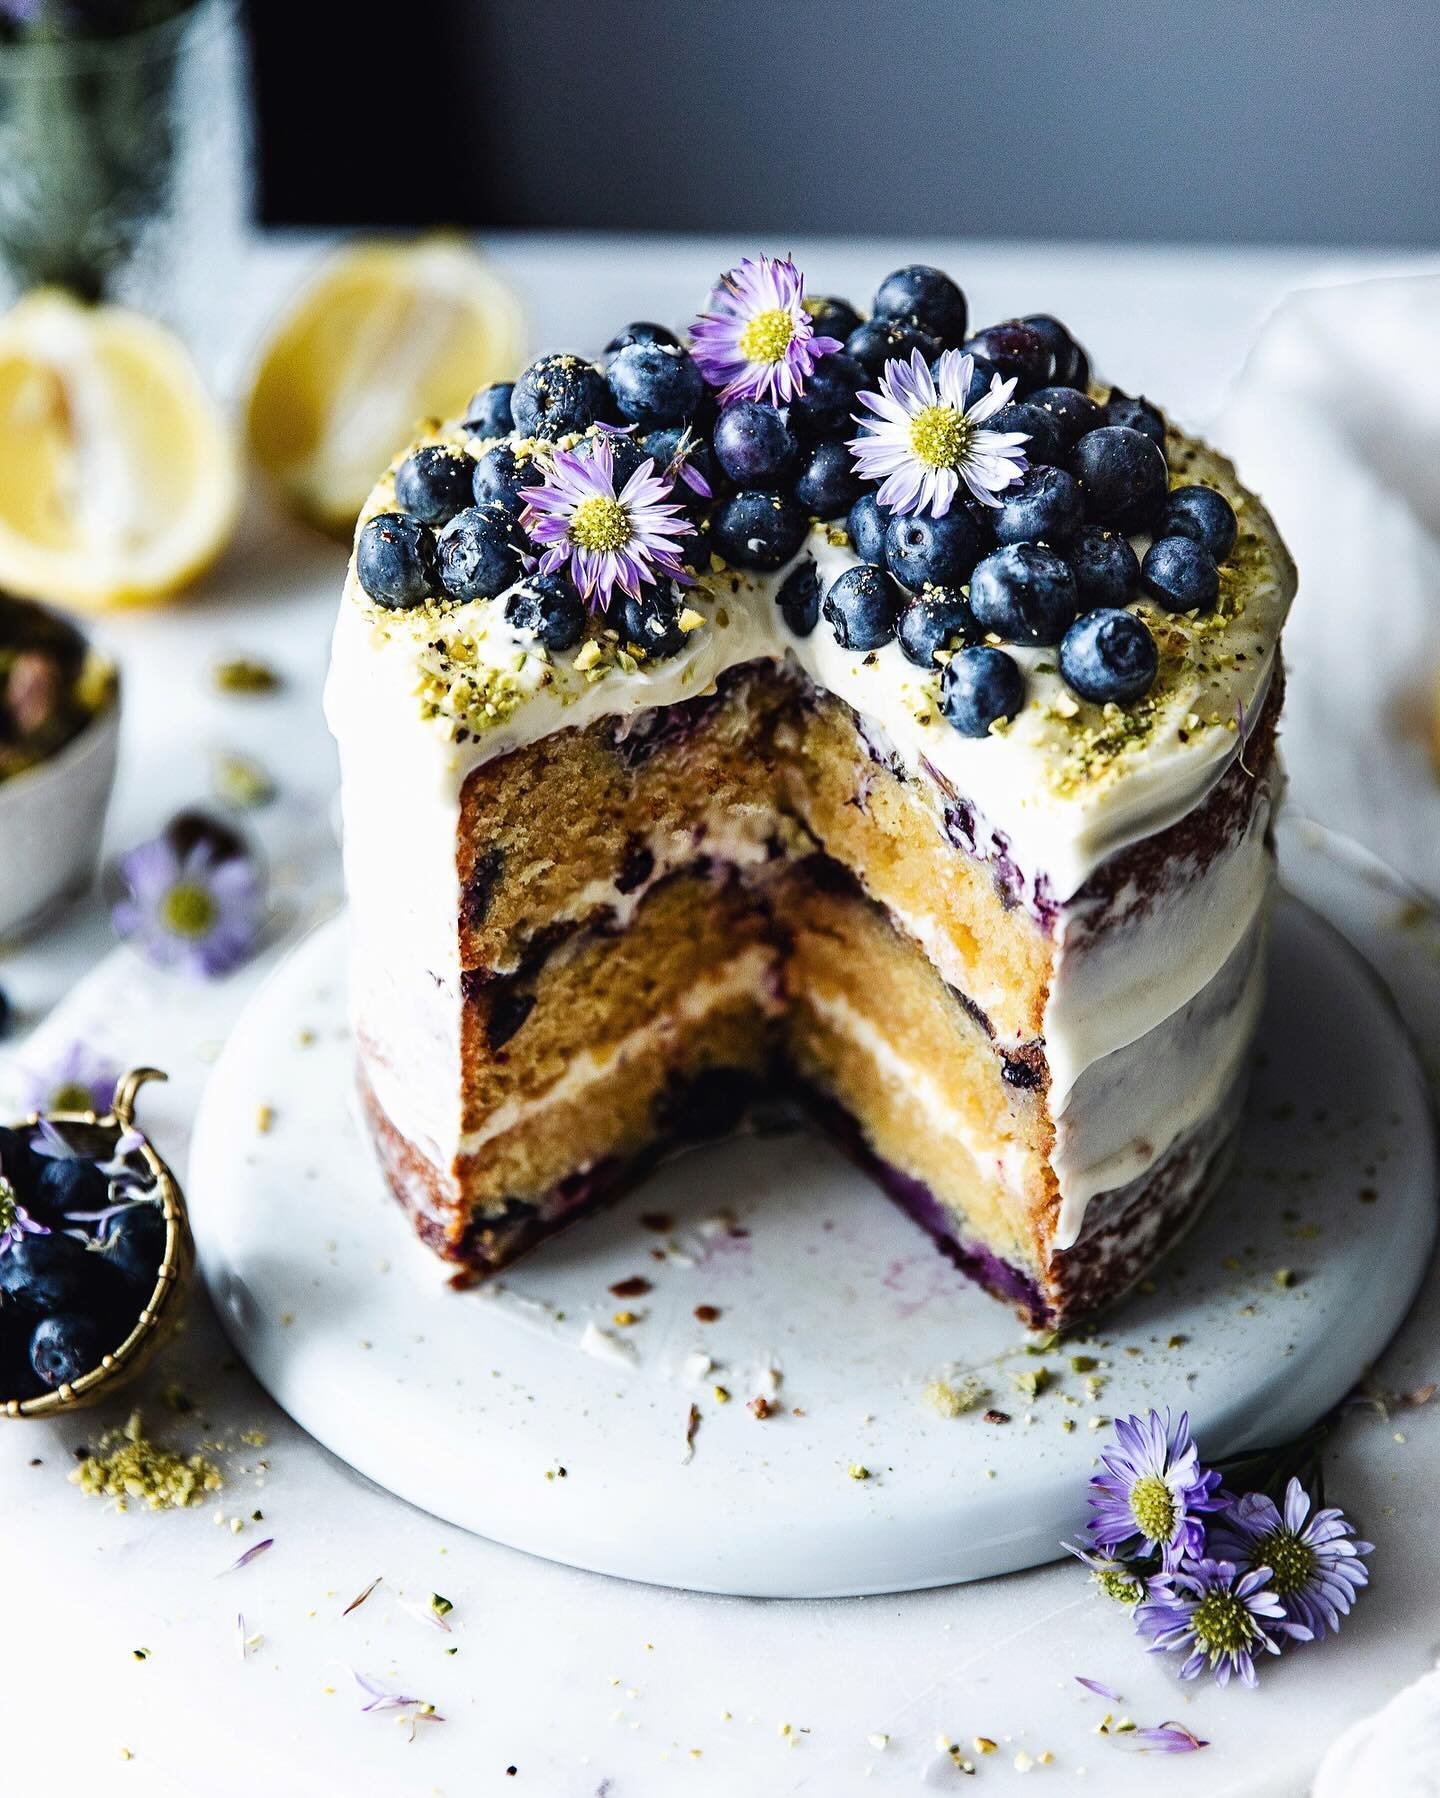 This super moist Lemon Blueberry Cake is a dream come true!! 🫐🍋 I made it impossibly moist and all the velvety cream cheese frosting make all the sweet and tangy flavors shine even more! Is one of the top cakes from the blog and it truly deserves a